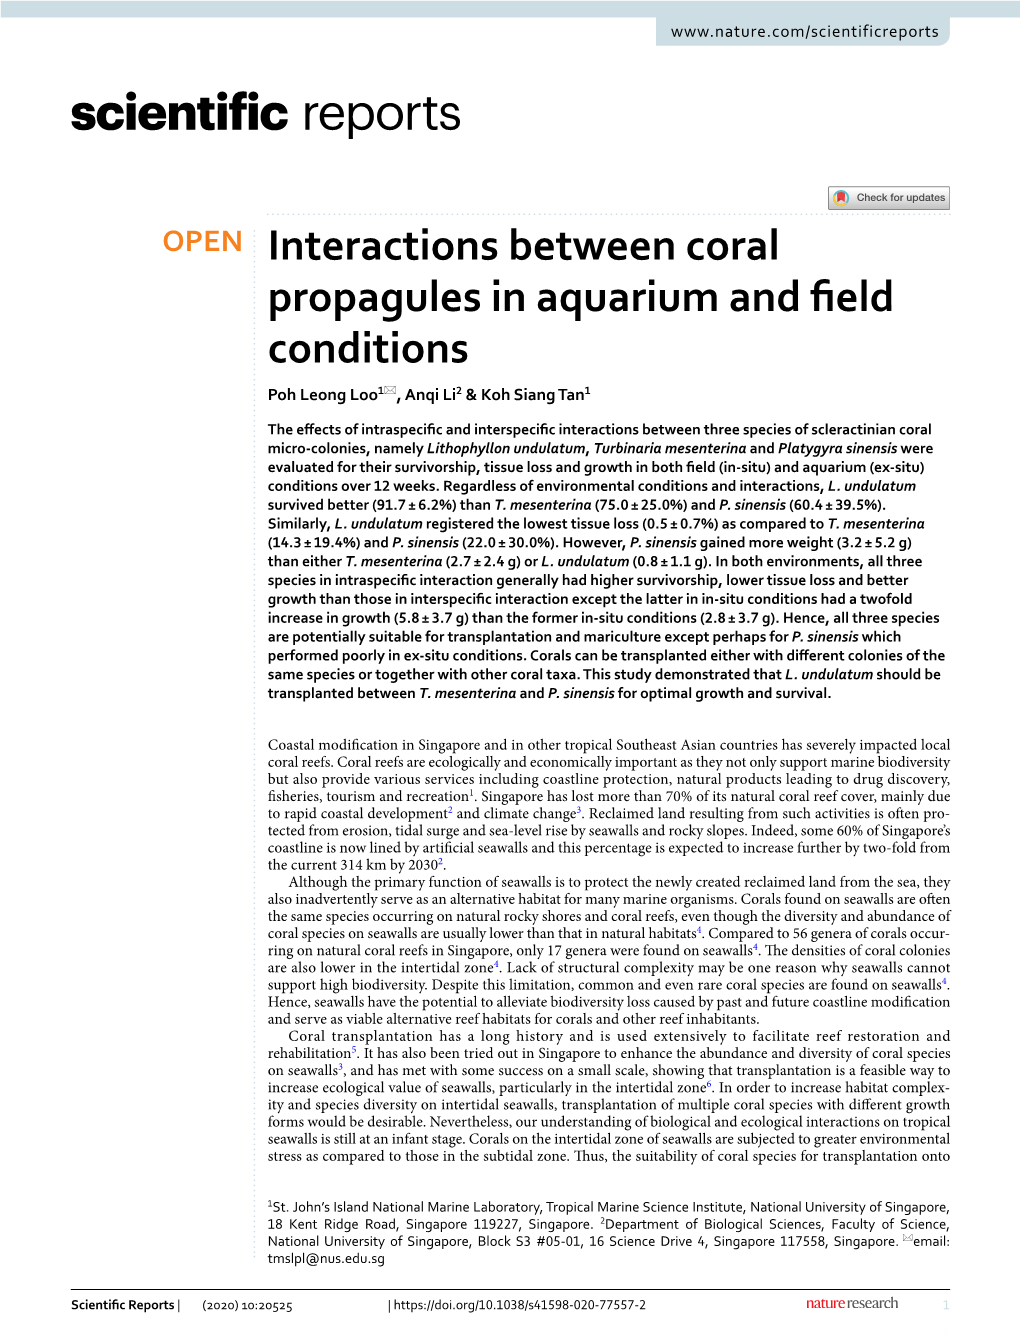 Interactions Between Coral Propagules in Aquarium and Field Conditions